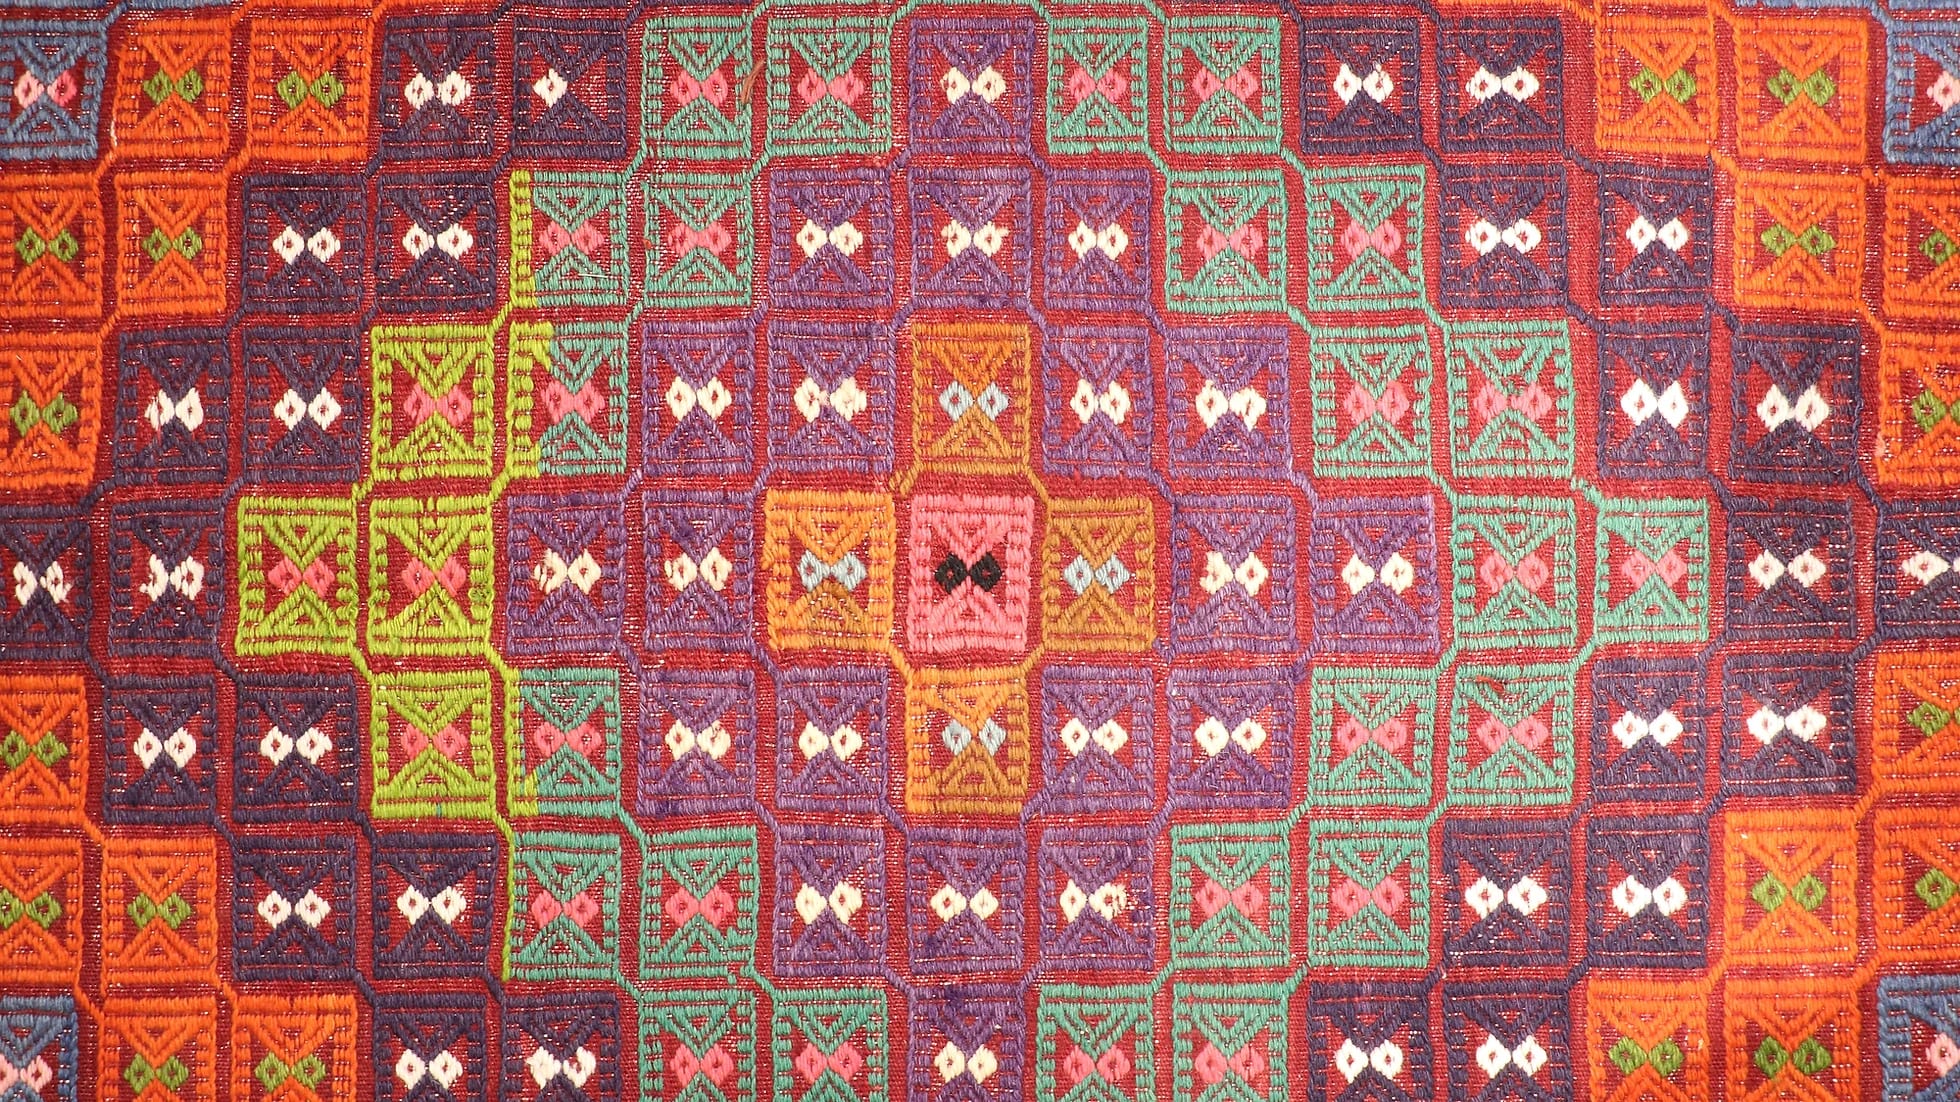 a very colorful vibrant and vivid handwoven cecim mid-century rug from Turkey by Kilim Couture New York